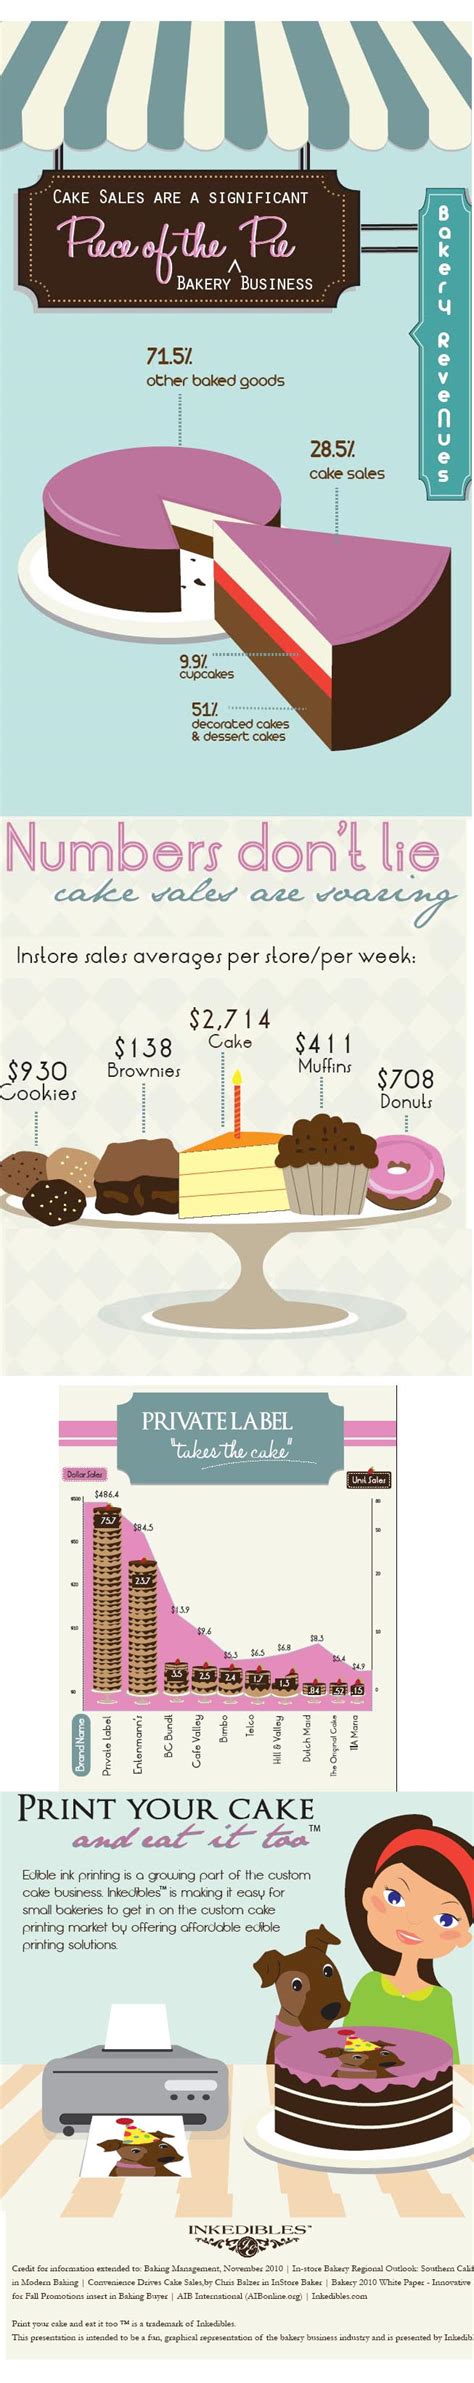 Best 25 dessert names ideas on pinterest; 53 Cute and Catchy Cake Business Names | BrandonGaille.com